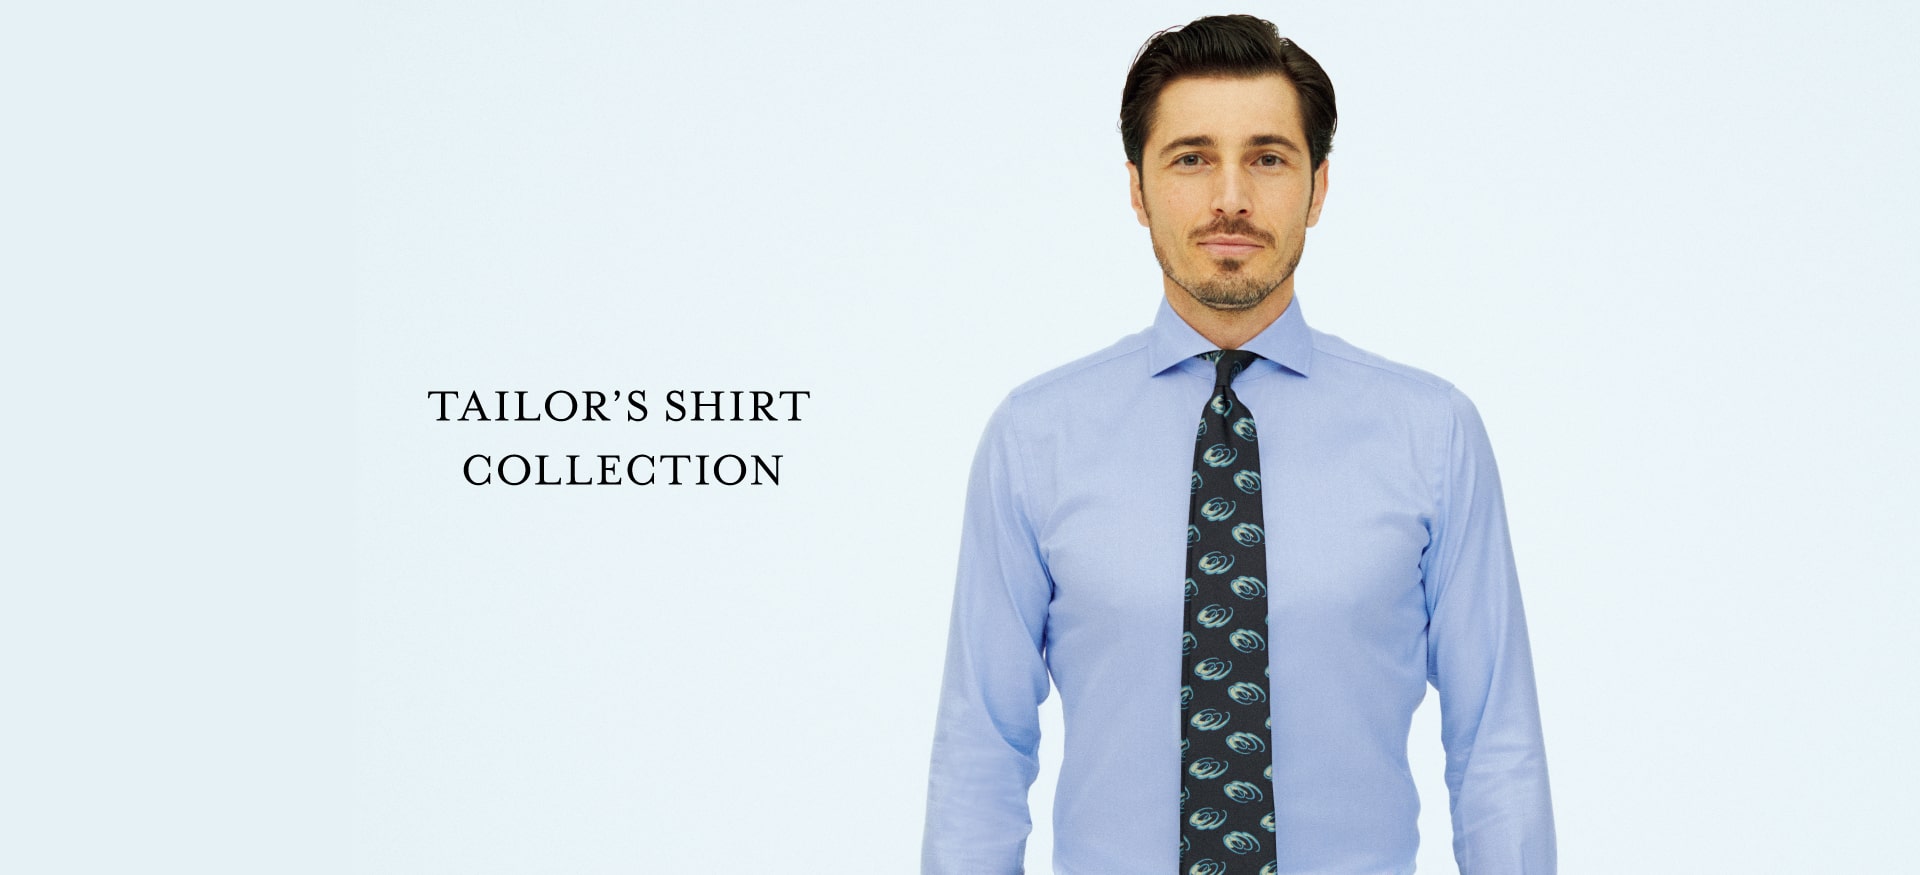 TAILOR’S SHIRT COLLECTION